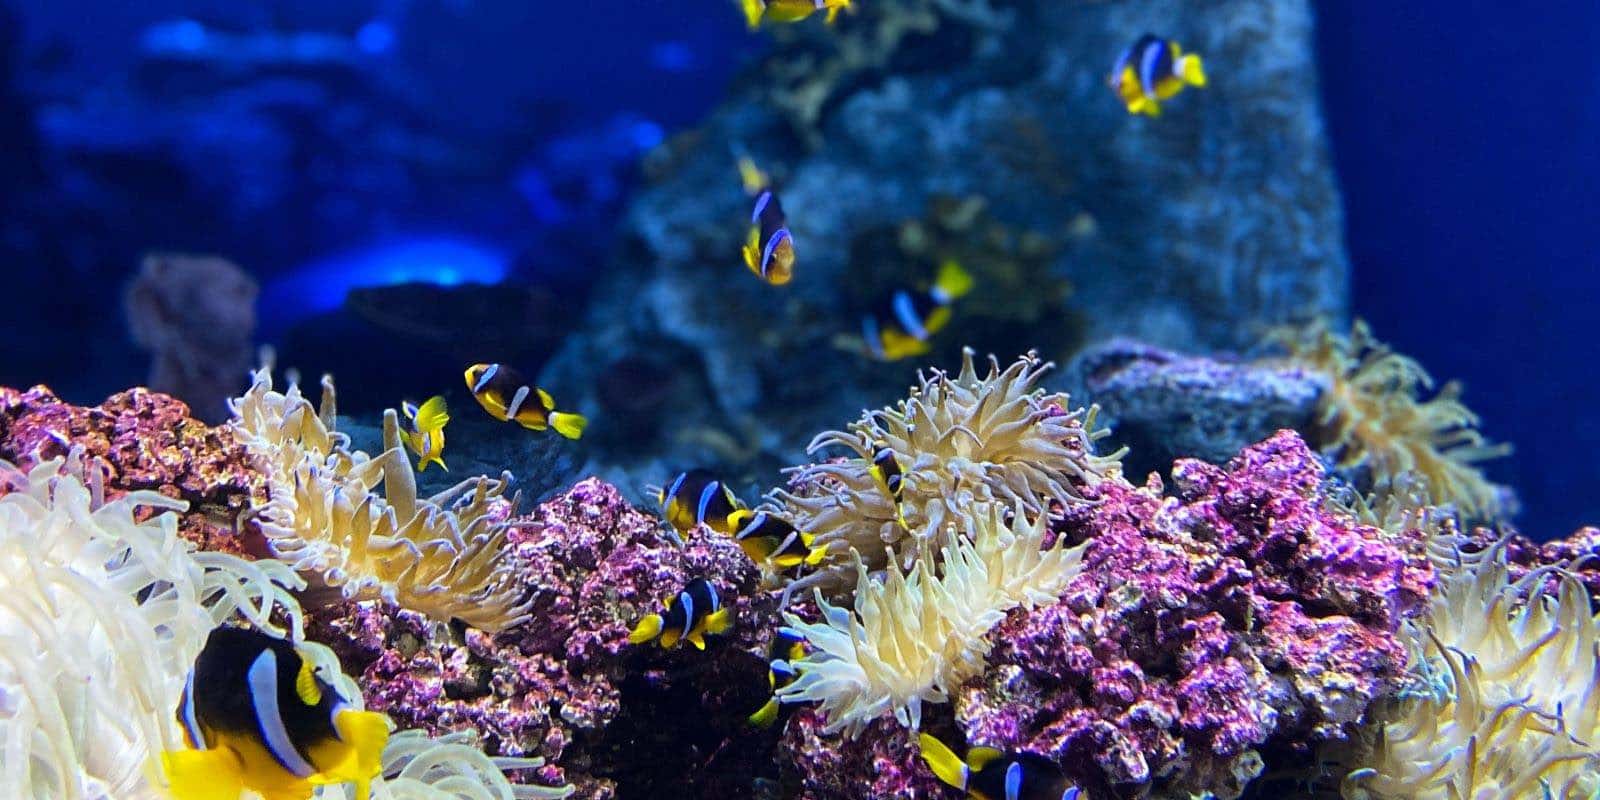 yellow and black clown fish under the sea with coral reefs